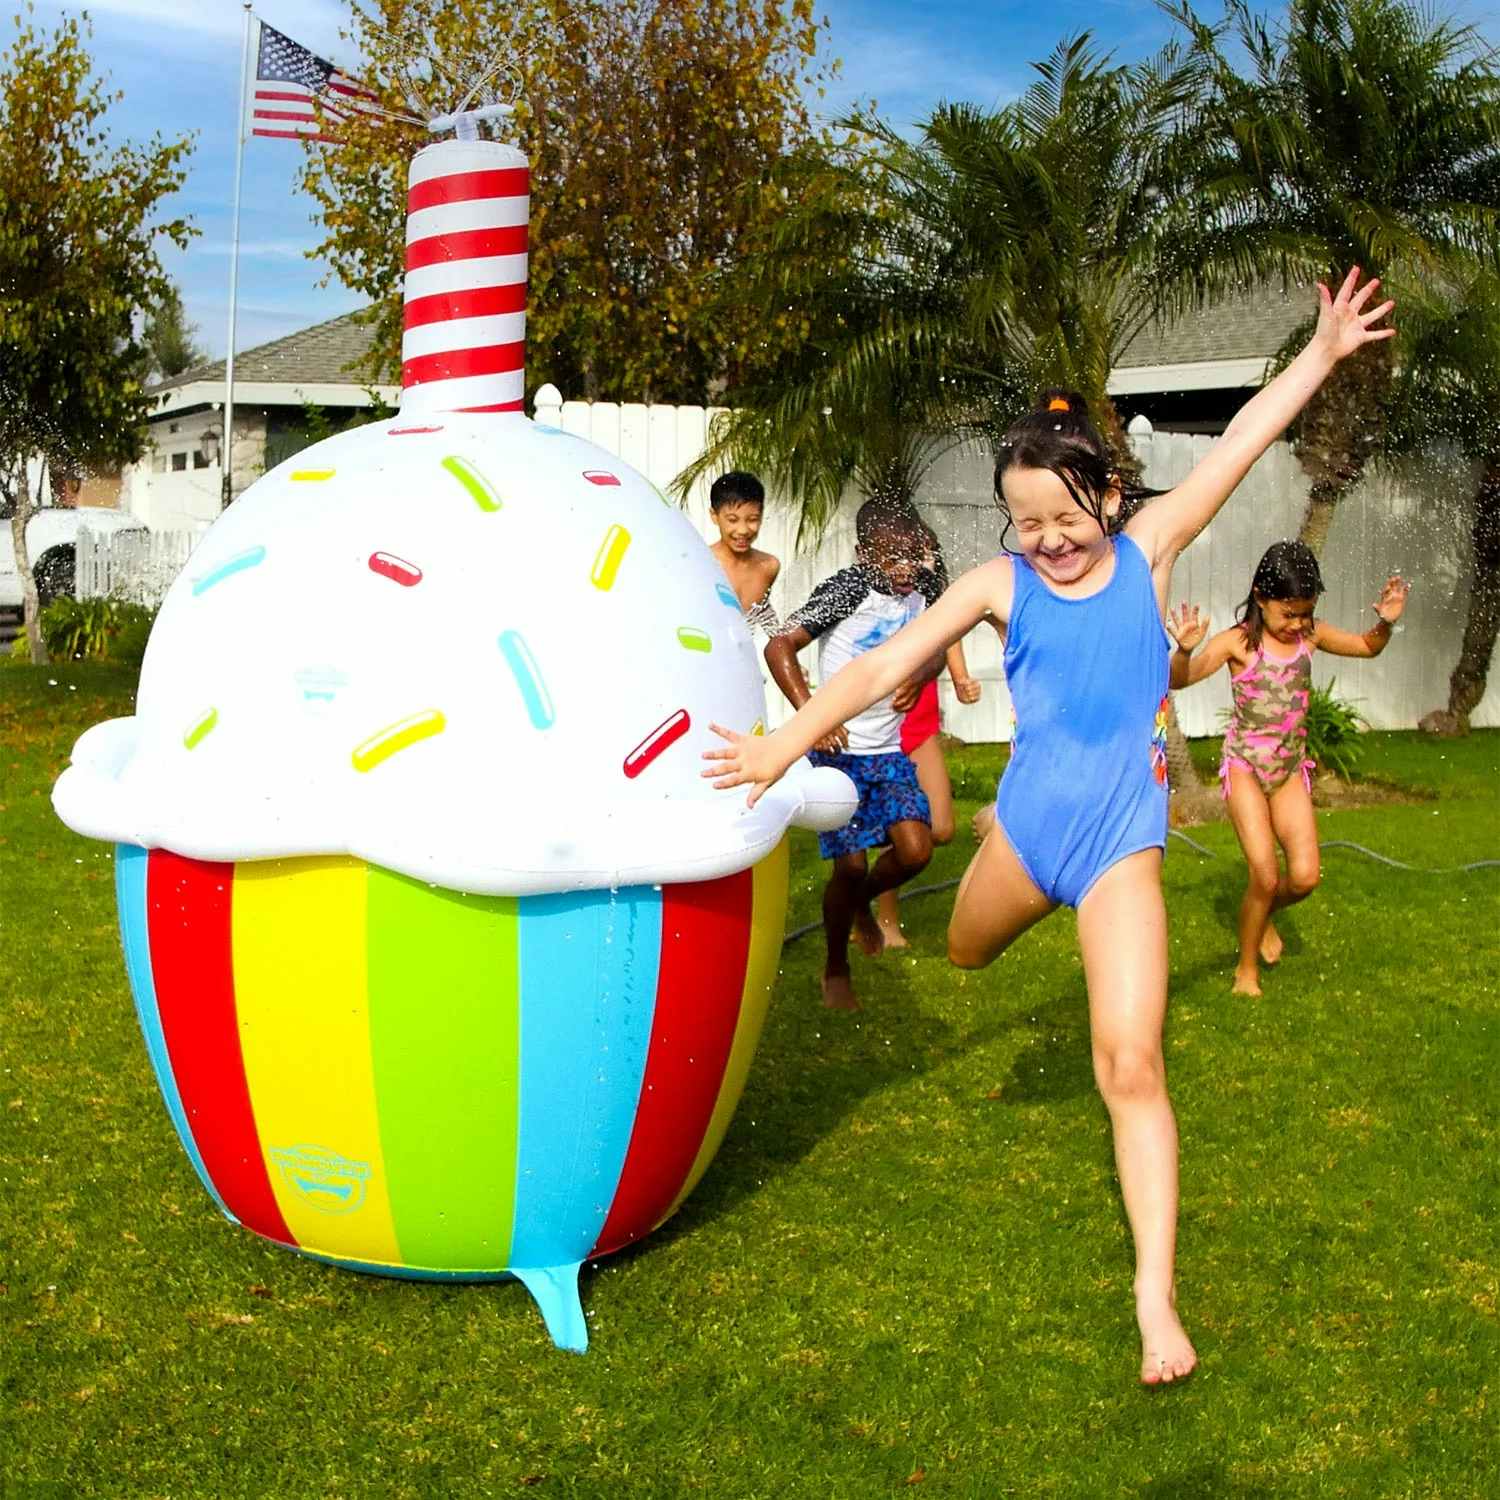 kids playing around a giant inflatable cupcake sprinkler